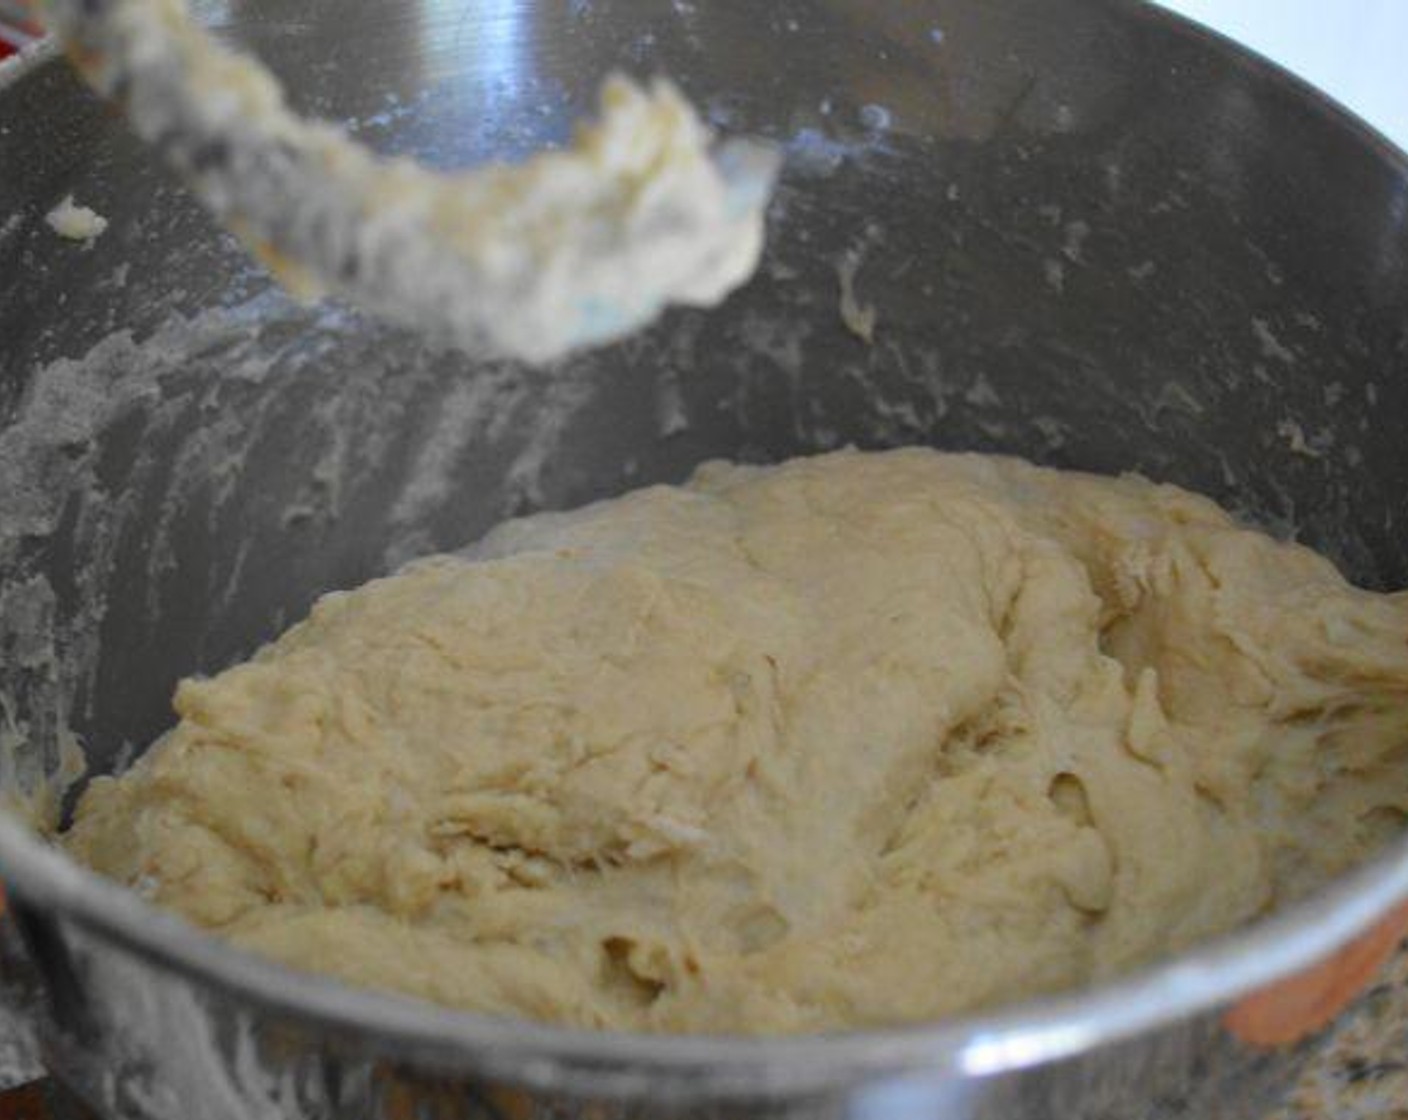 step 3 Slowly and gradually add in the High-Gluten Bread Flour (8 cups) until it is all incorporated. Let the dough hook continue working until the dough is elastic and starts to pull away from the sides of the bowl. Then it's done.